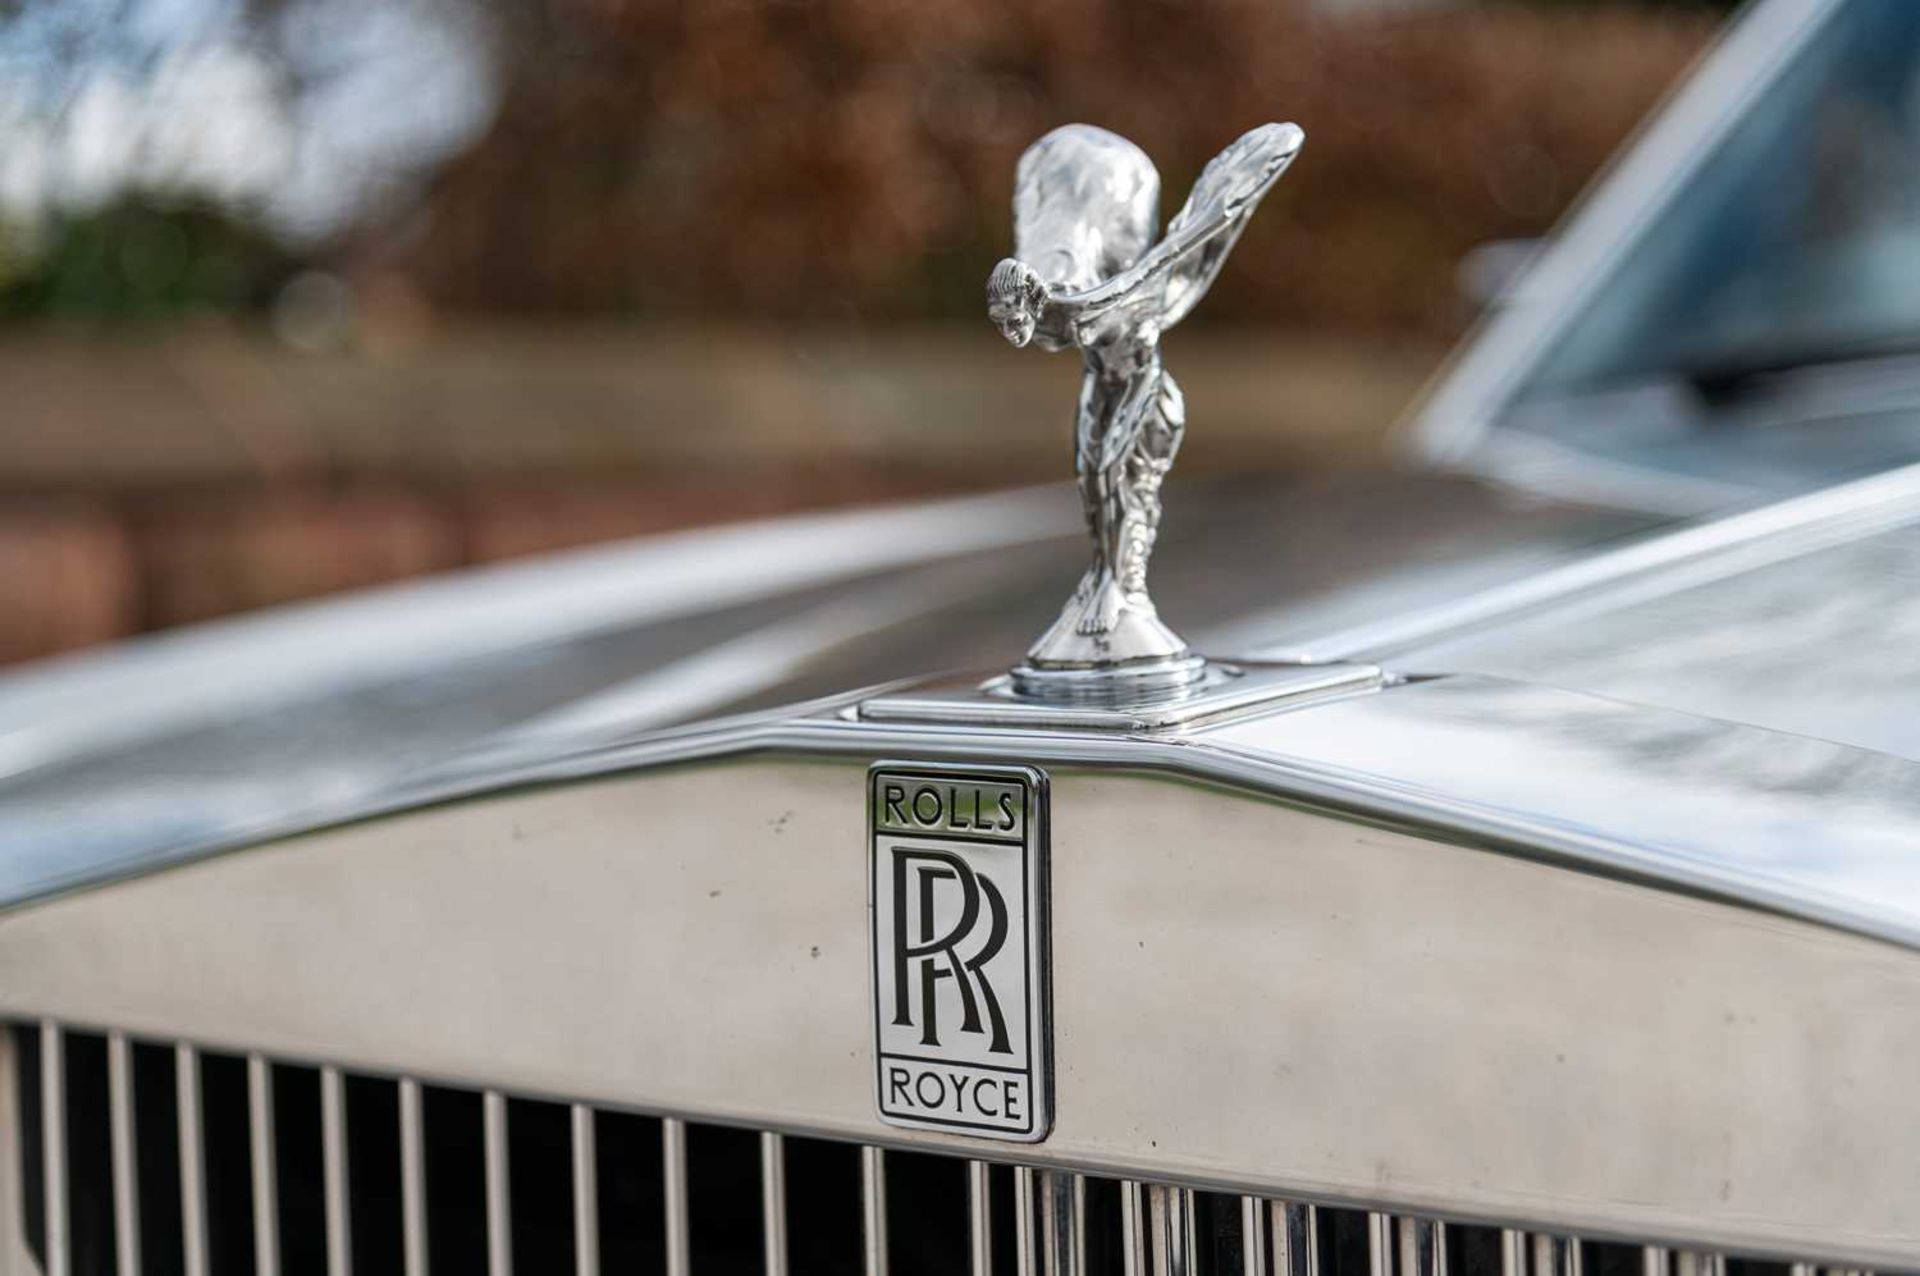 1985 Rolls Royce Silver Spirit From long term ownership, comes complete with comprehensive history f - Image 35 of 79